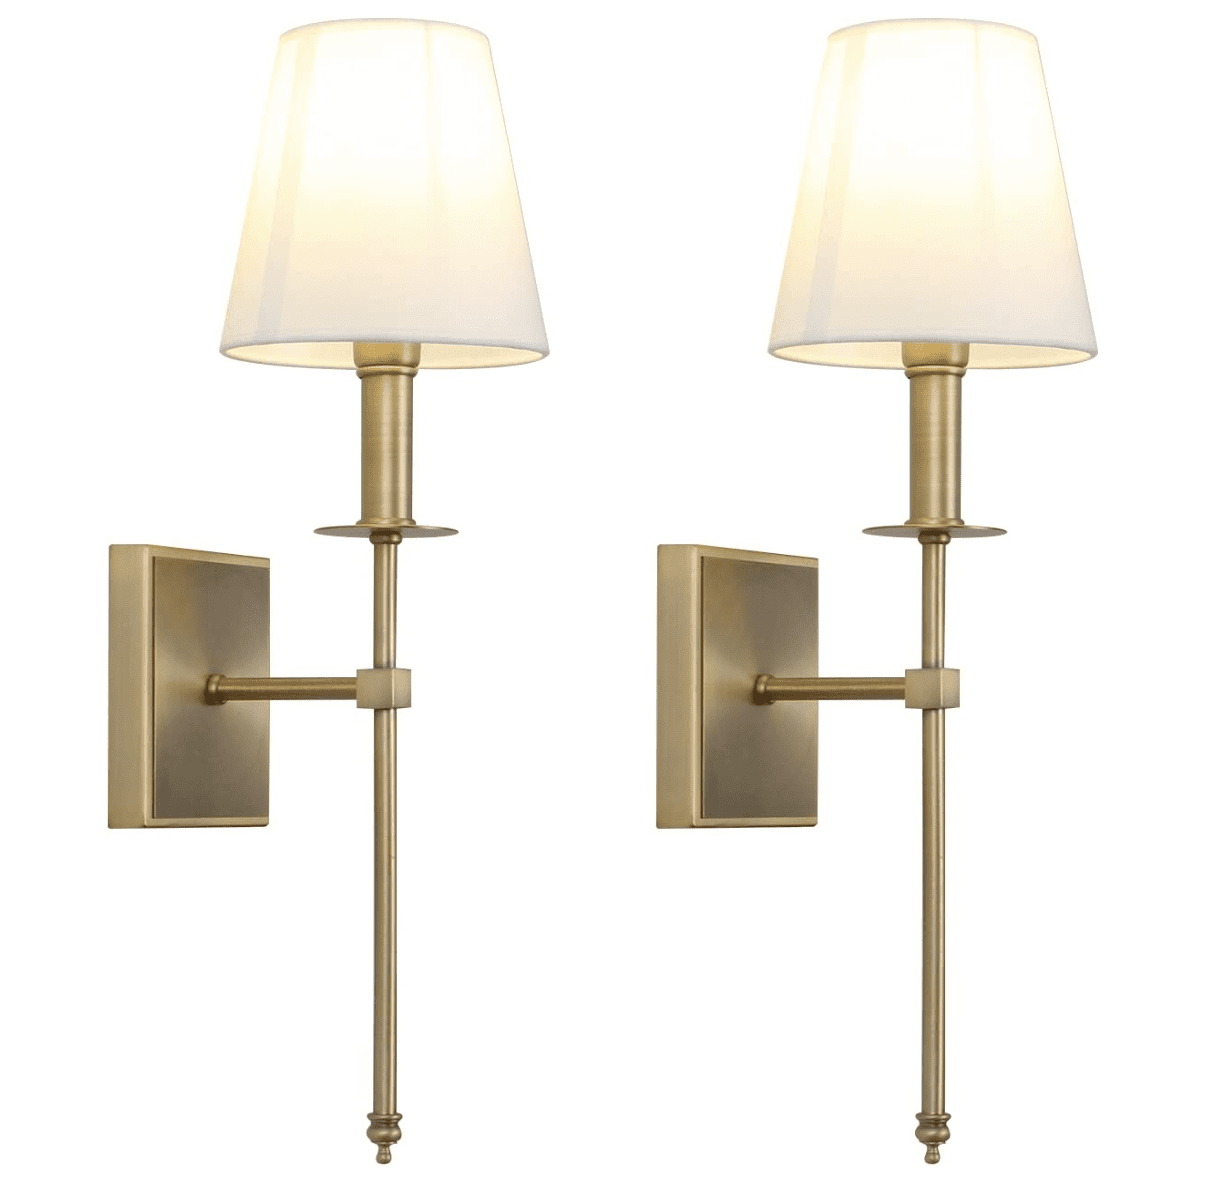 Lighting Solution: Battery Operated Sconces